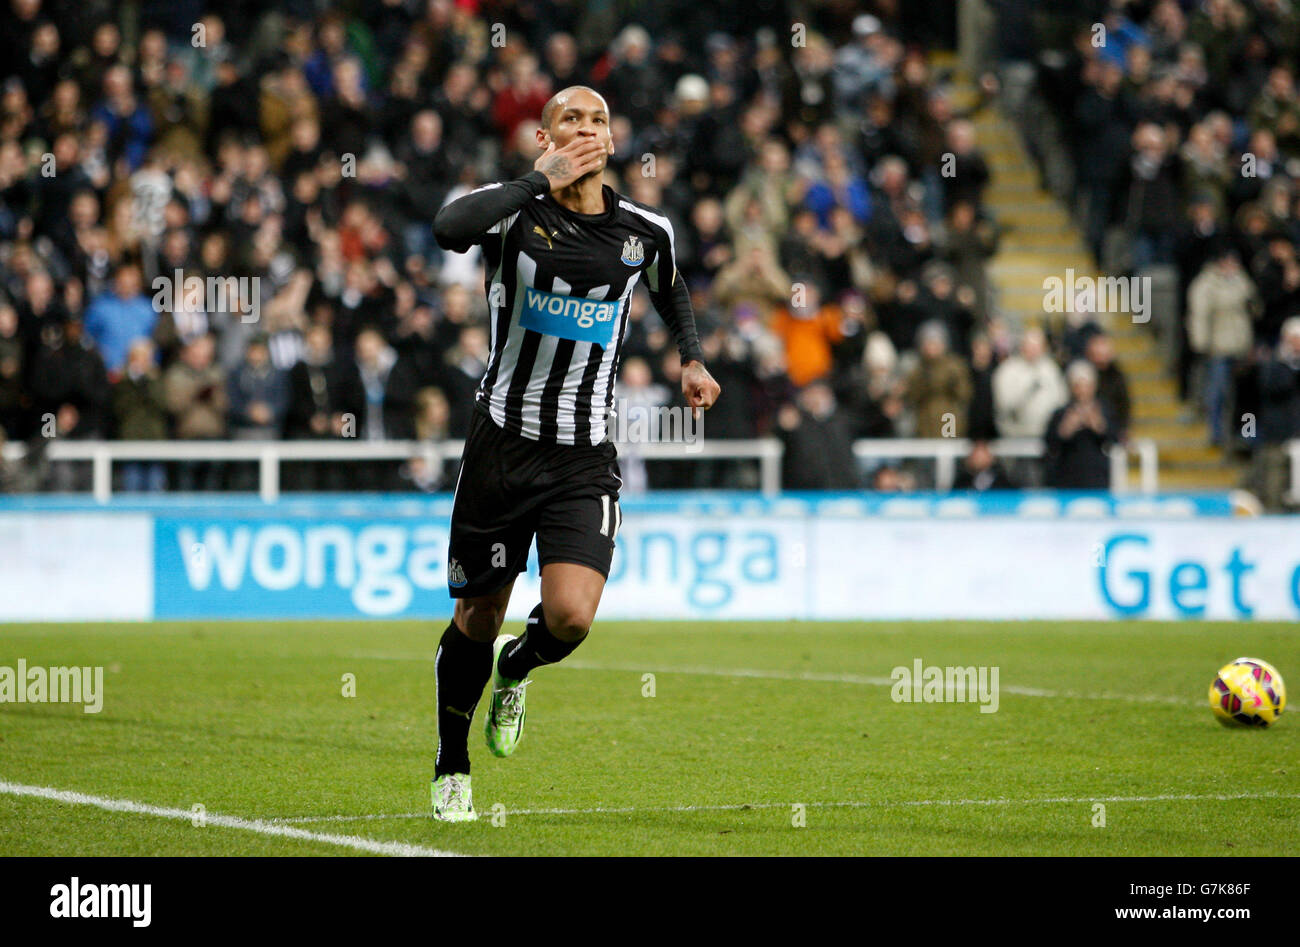 Newcastle United's Yoan Gouffran celebrates scoring his sides first goal of the game the Barclays Premier League match at St James' Park, Newcastle. Stock Photo